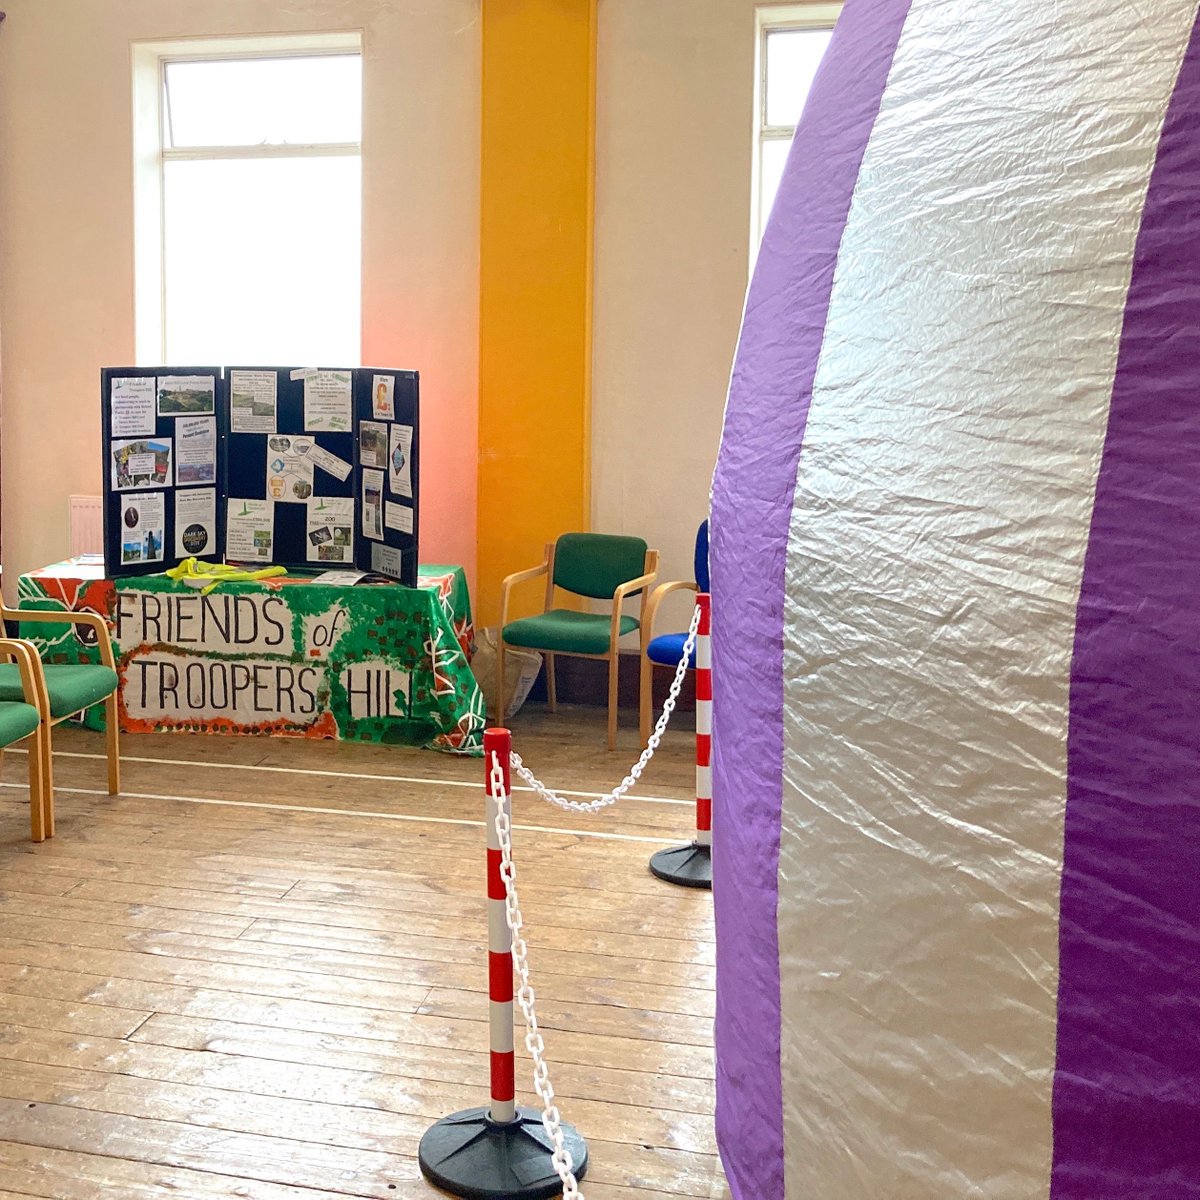 🌿 LOCAL FUNDRAISER 🌿 - we recently supported our local nature reserve by putting on three free performances in one of our large 7m domes. 120 adults and children from our local area enjoyed peering up at the planetarium night sky and learning about the Universe ✨ #EduTwitter